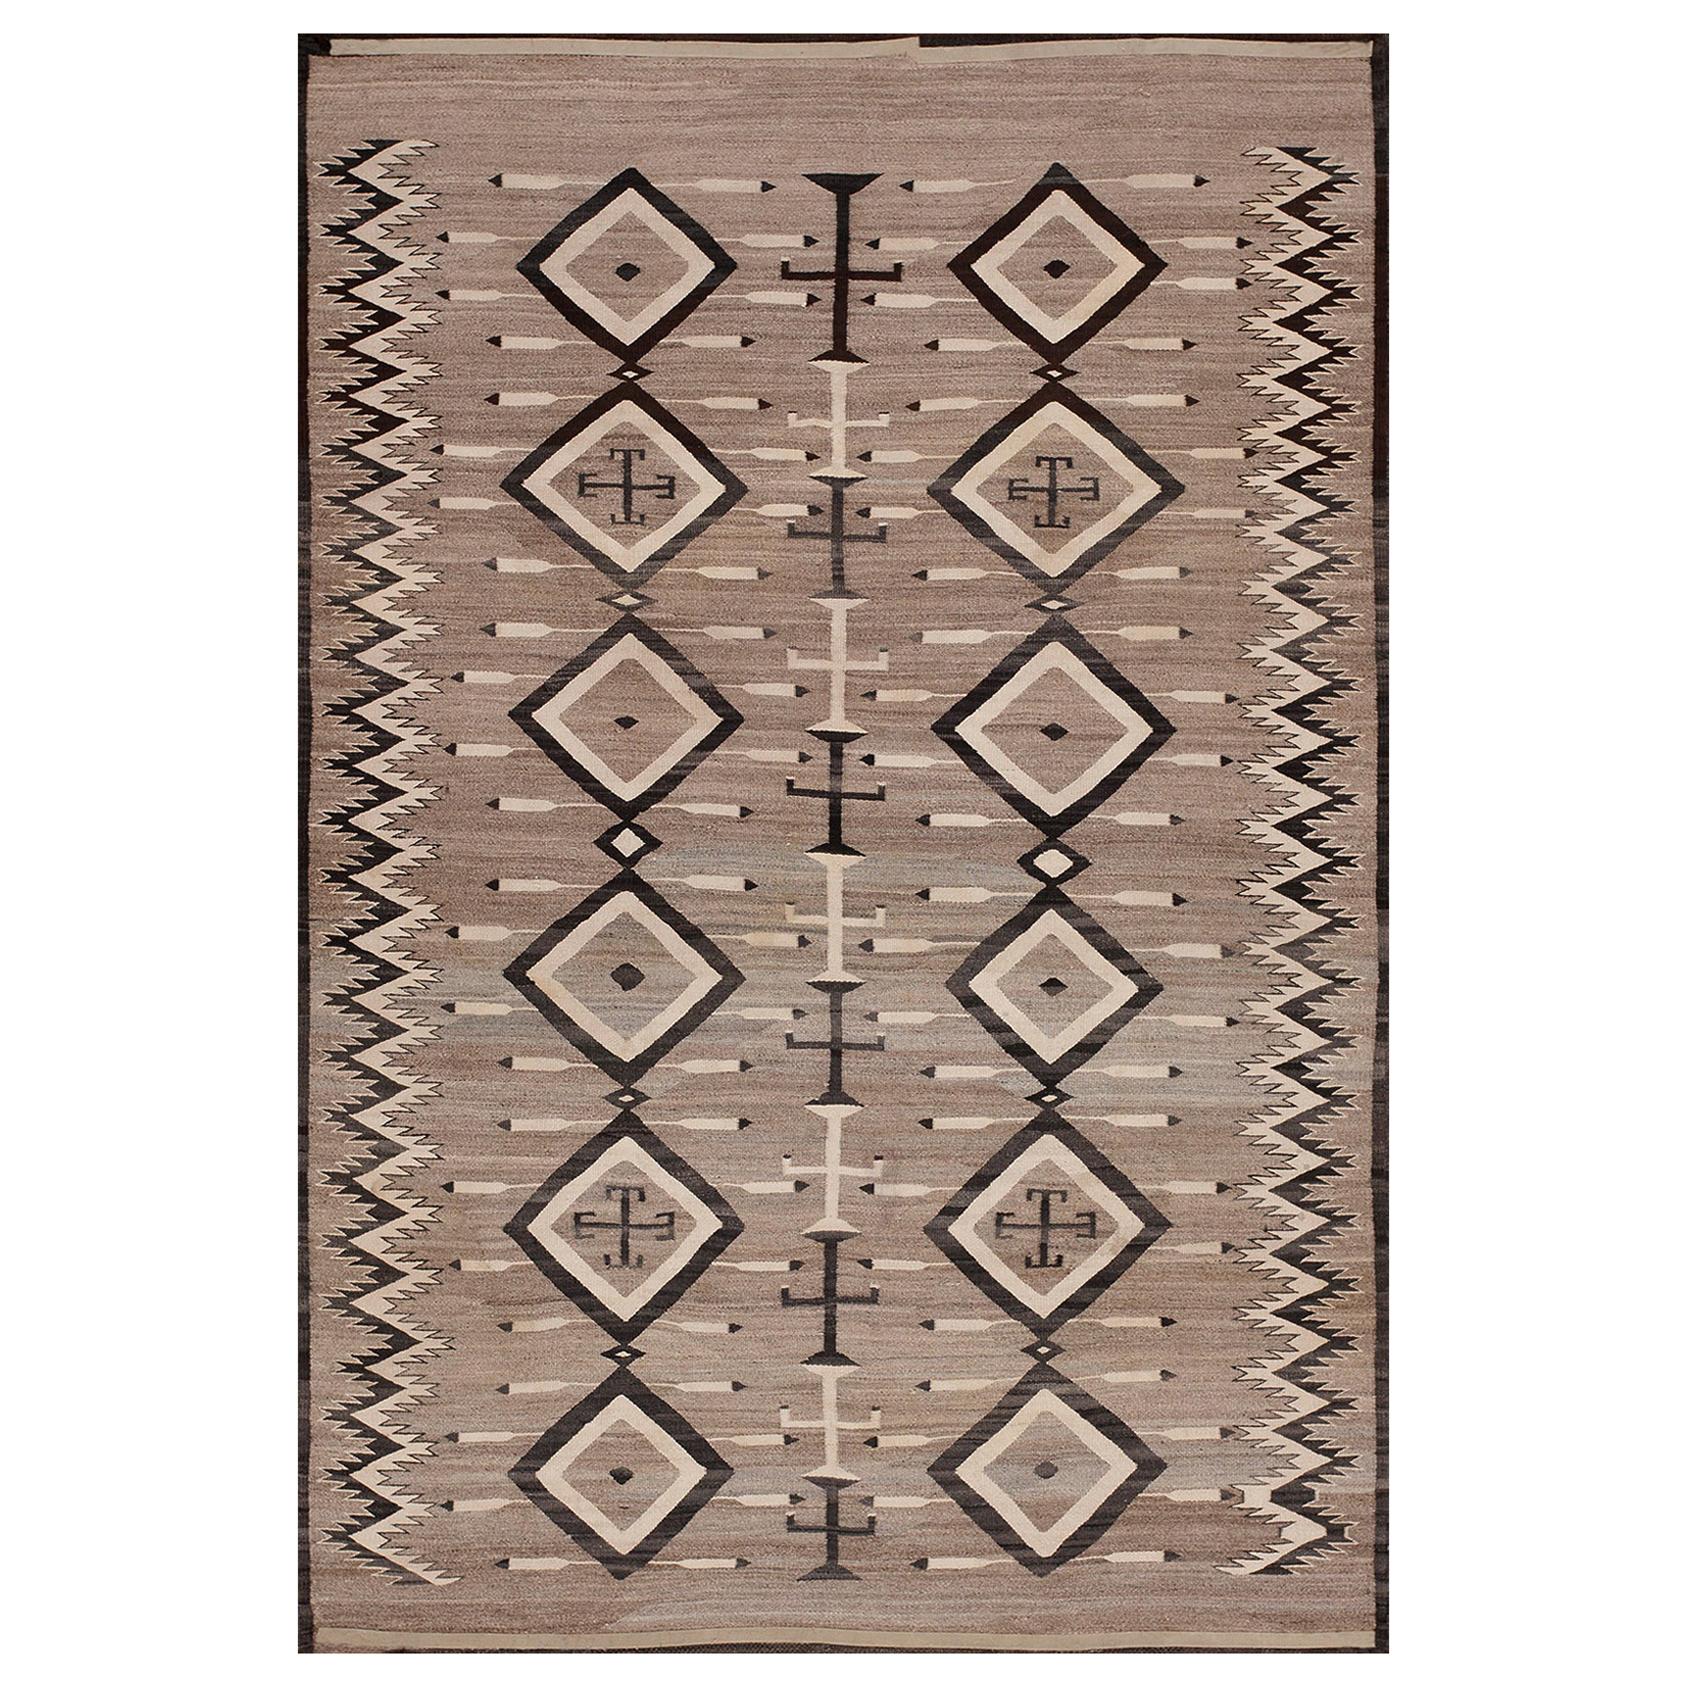 Early 20th Century American Navajo Carpet ( 4'6" x 6'8" - 137 x 203 ) For Sale